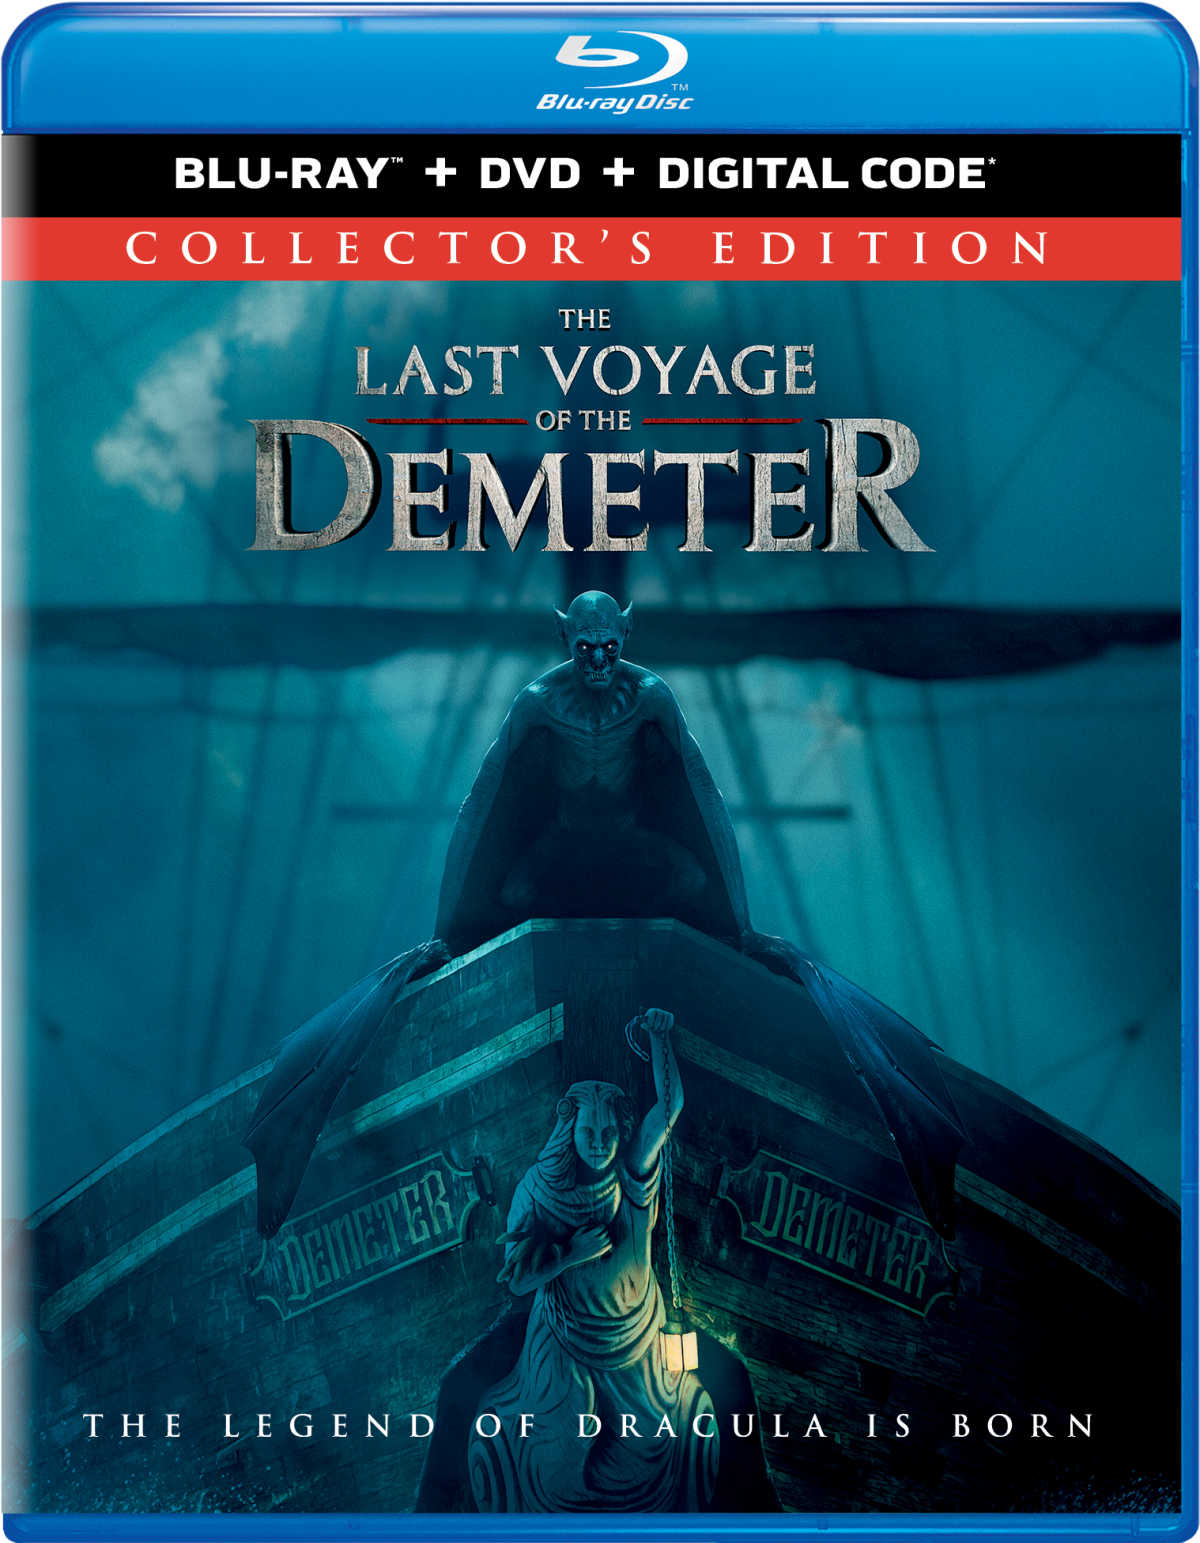 The Last Voyage of the Demeter is a must-see for fans of horror and Dracula. This unique and suspenseful film tells the story of the merchant ship Demeter as it carries a terrifying cargo across the ocean. With its solid story, R-rated scares, and faithful adaptation of the original Dracula novel, The Last Voyage of the Demeter is sure to please teen and adult horror fans alike.